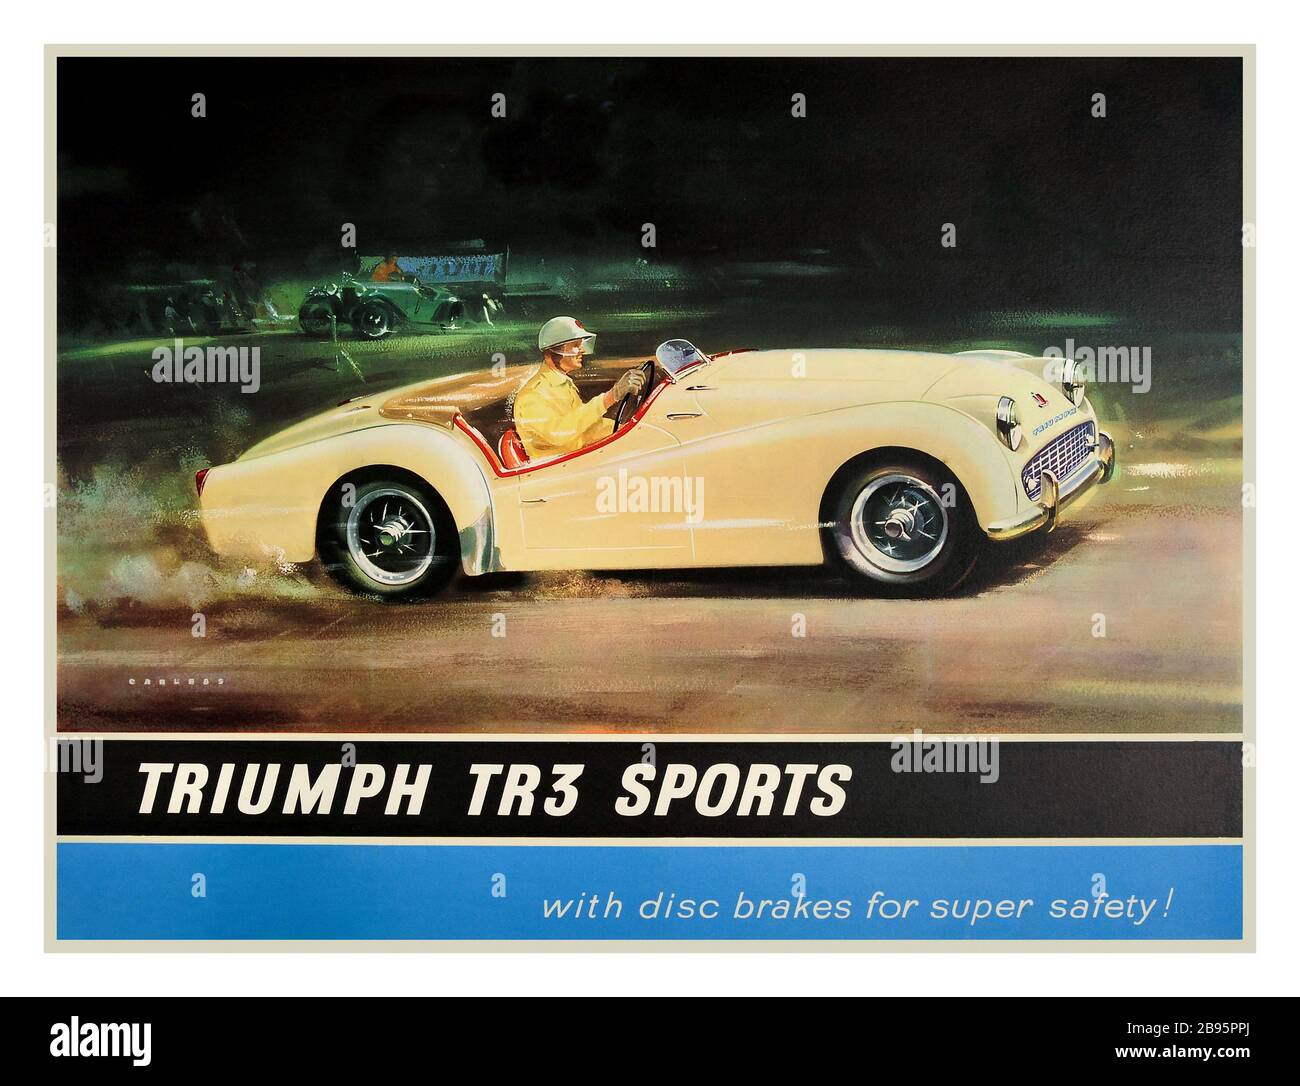 TRIUMPH TR3 Vintage 1950's advertising poster British UK sports car poster - Triumph TR3 Sports with disc brakes for super safety! - the British sports car produced by the Standard Triumph Motor Company, TR3 was one of the  top best sellers. Poster by renowned auto and aviation artist Vic Carless (1928-2011) featuring a cream colour TR3 racing past with the finish line and a green classic car in the background, UK, 1950s, artist designer: Vic Carless, Stock Photo